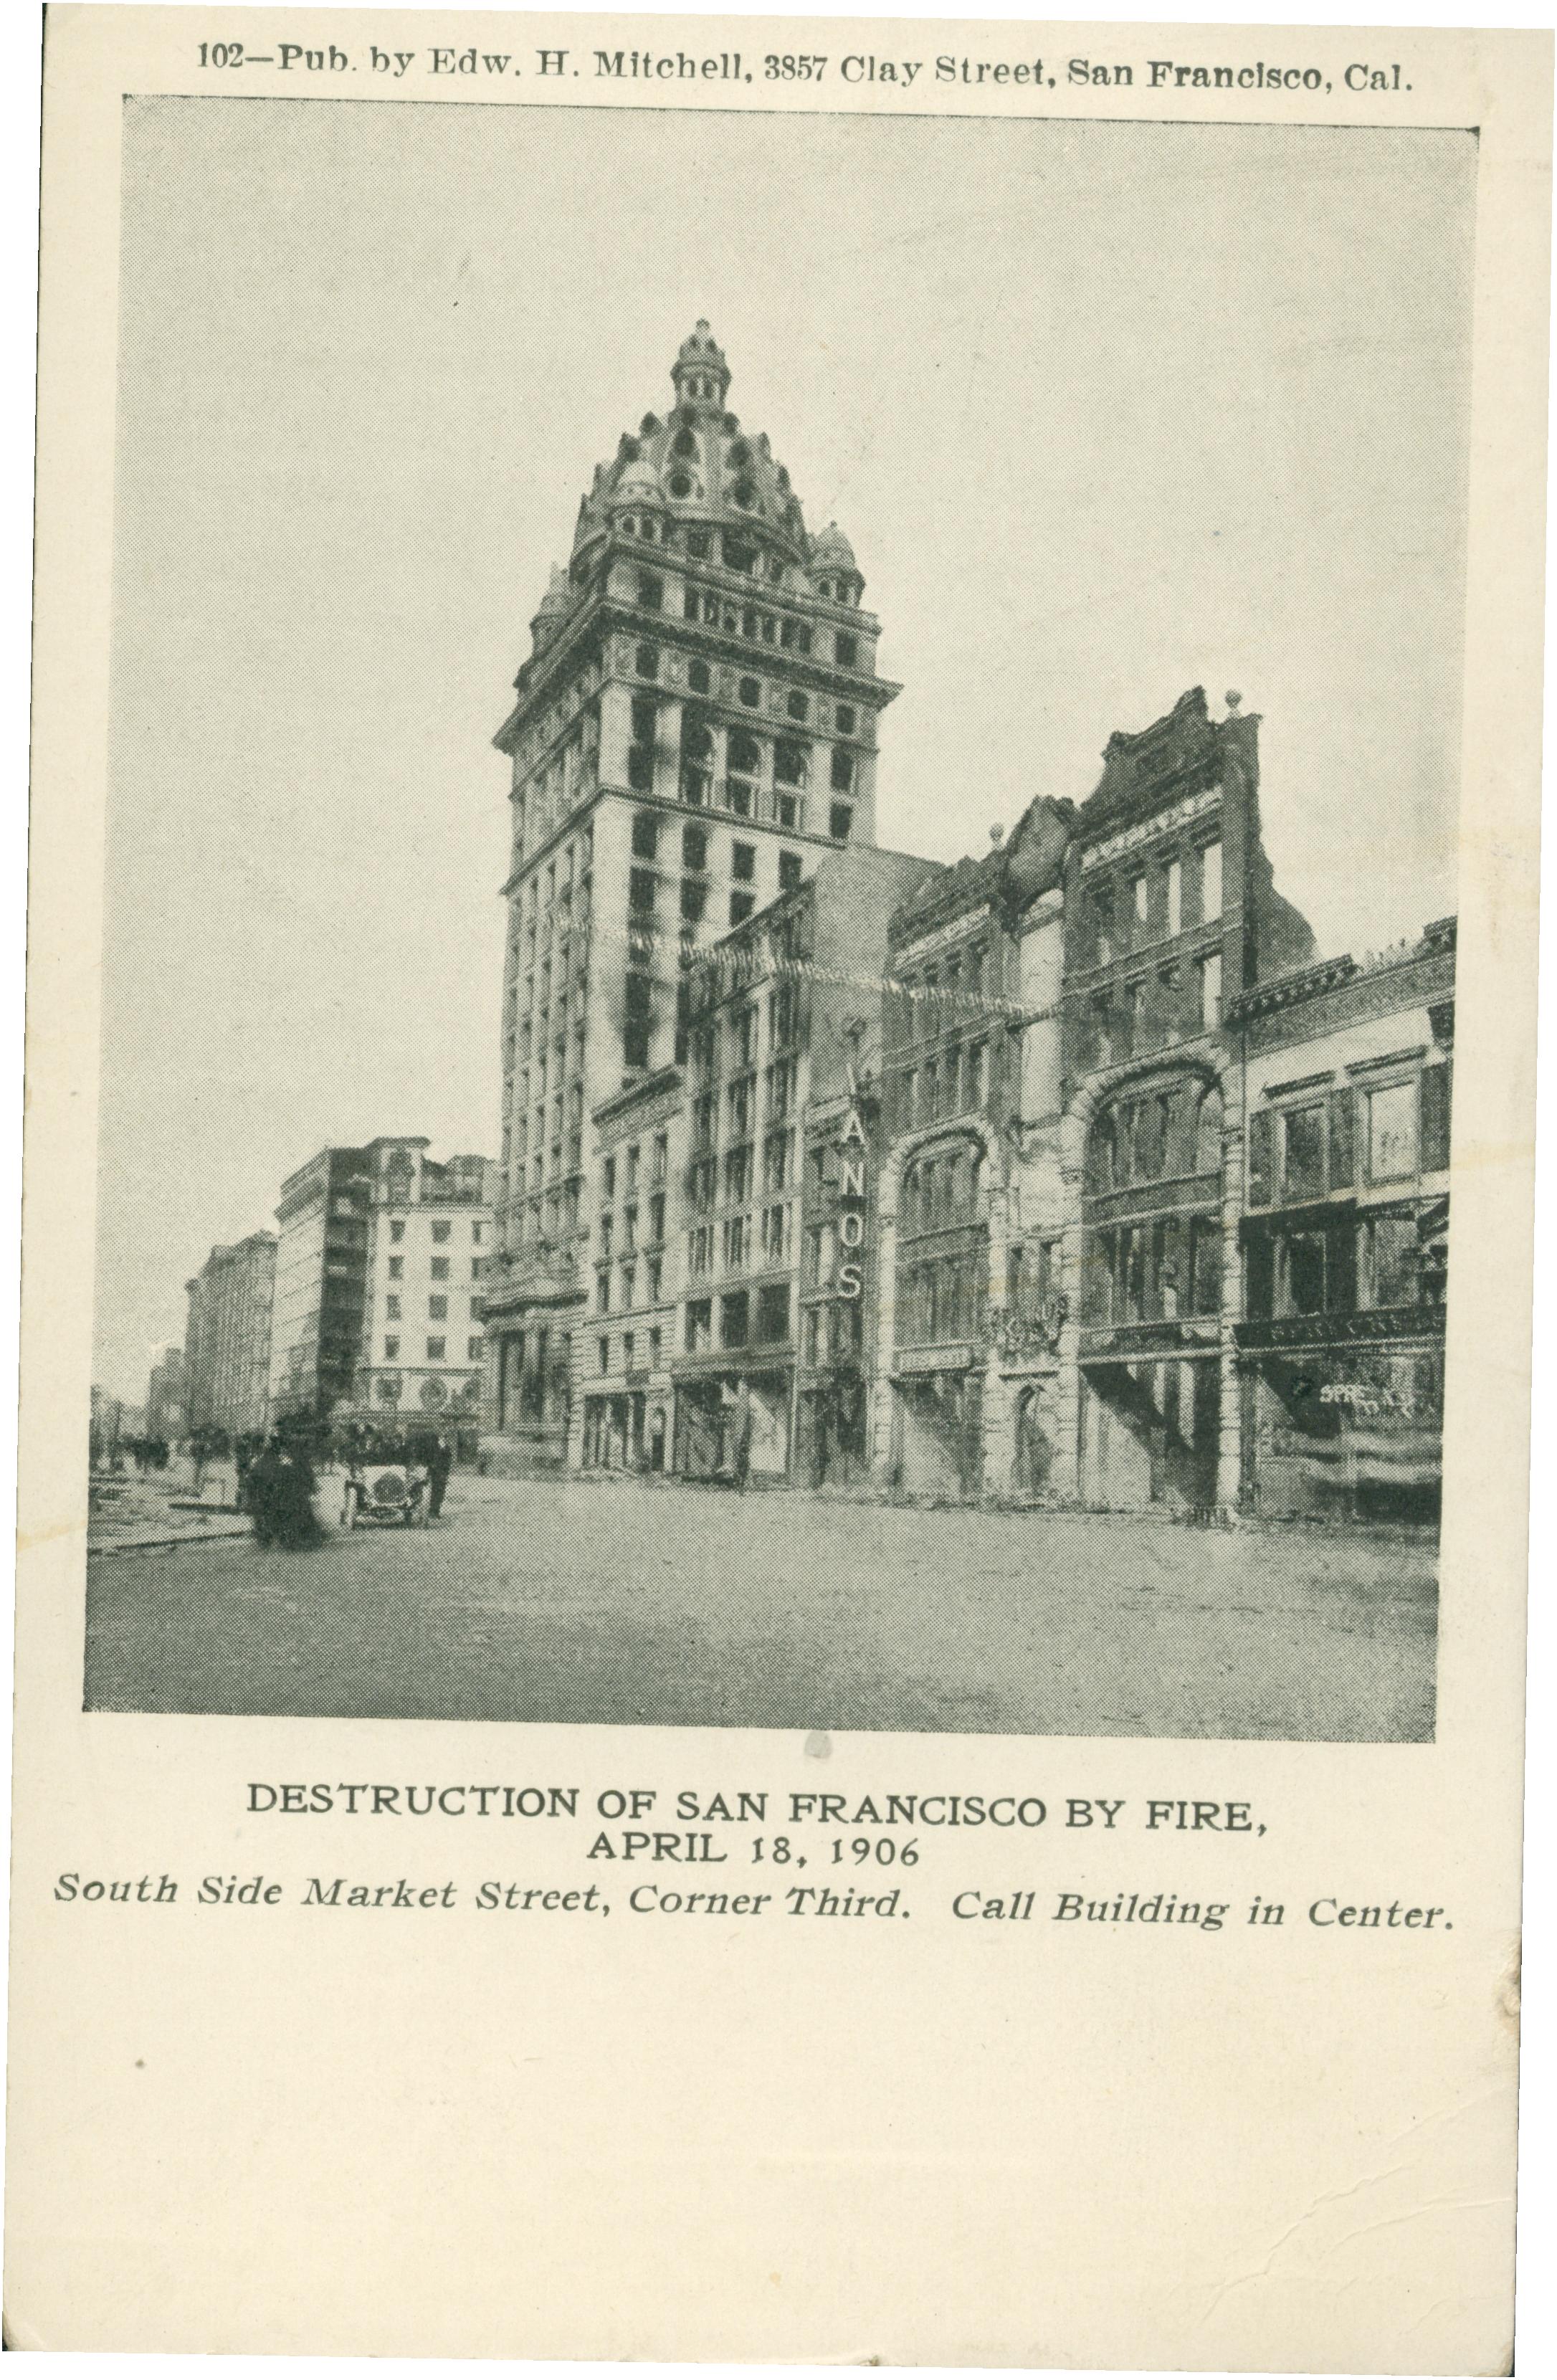 Shows a view of the ruins of the San Francisco Call Building, along with several other buildings